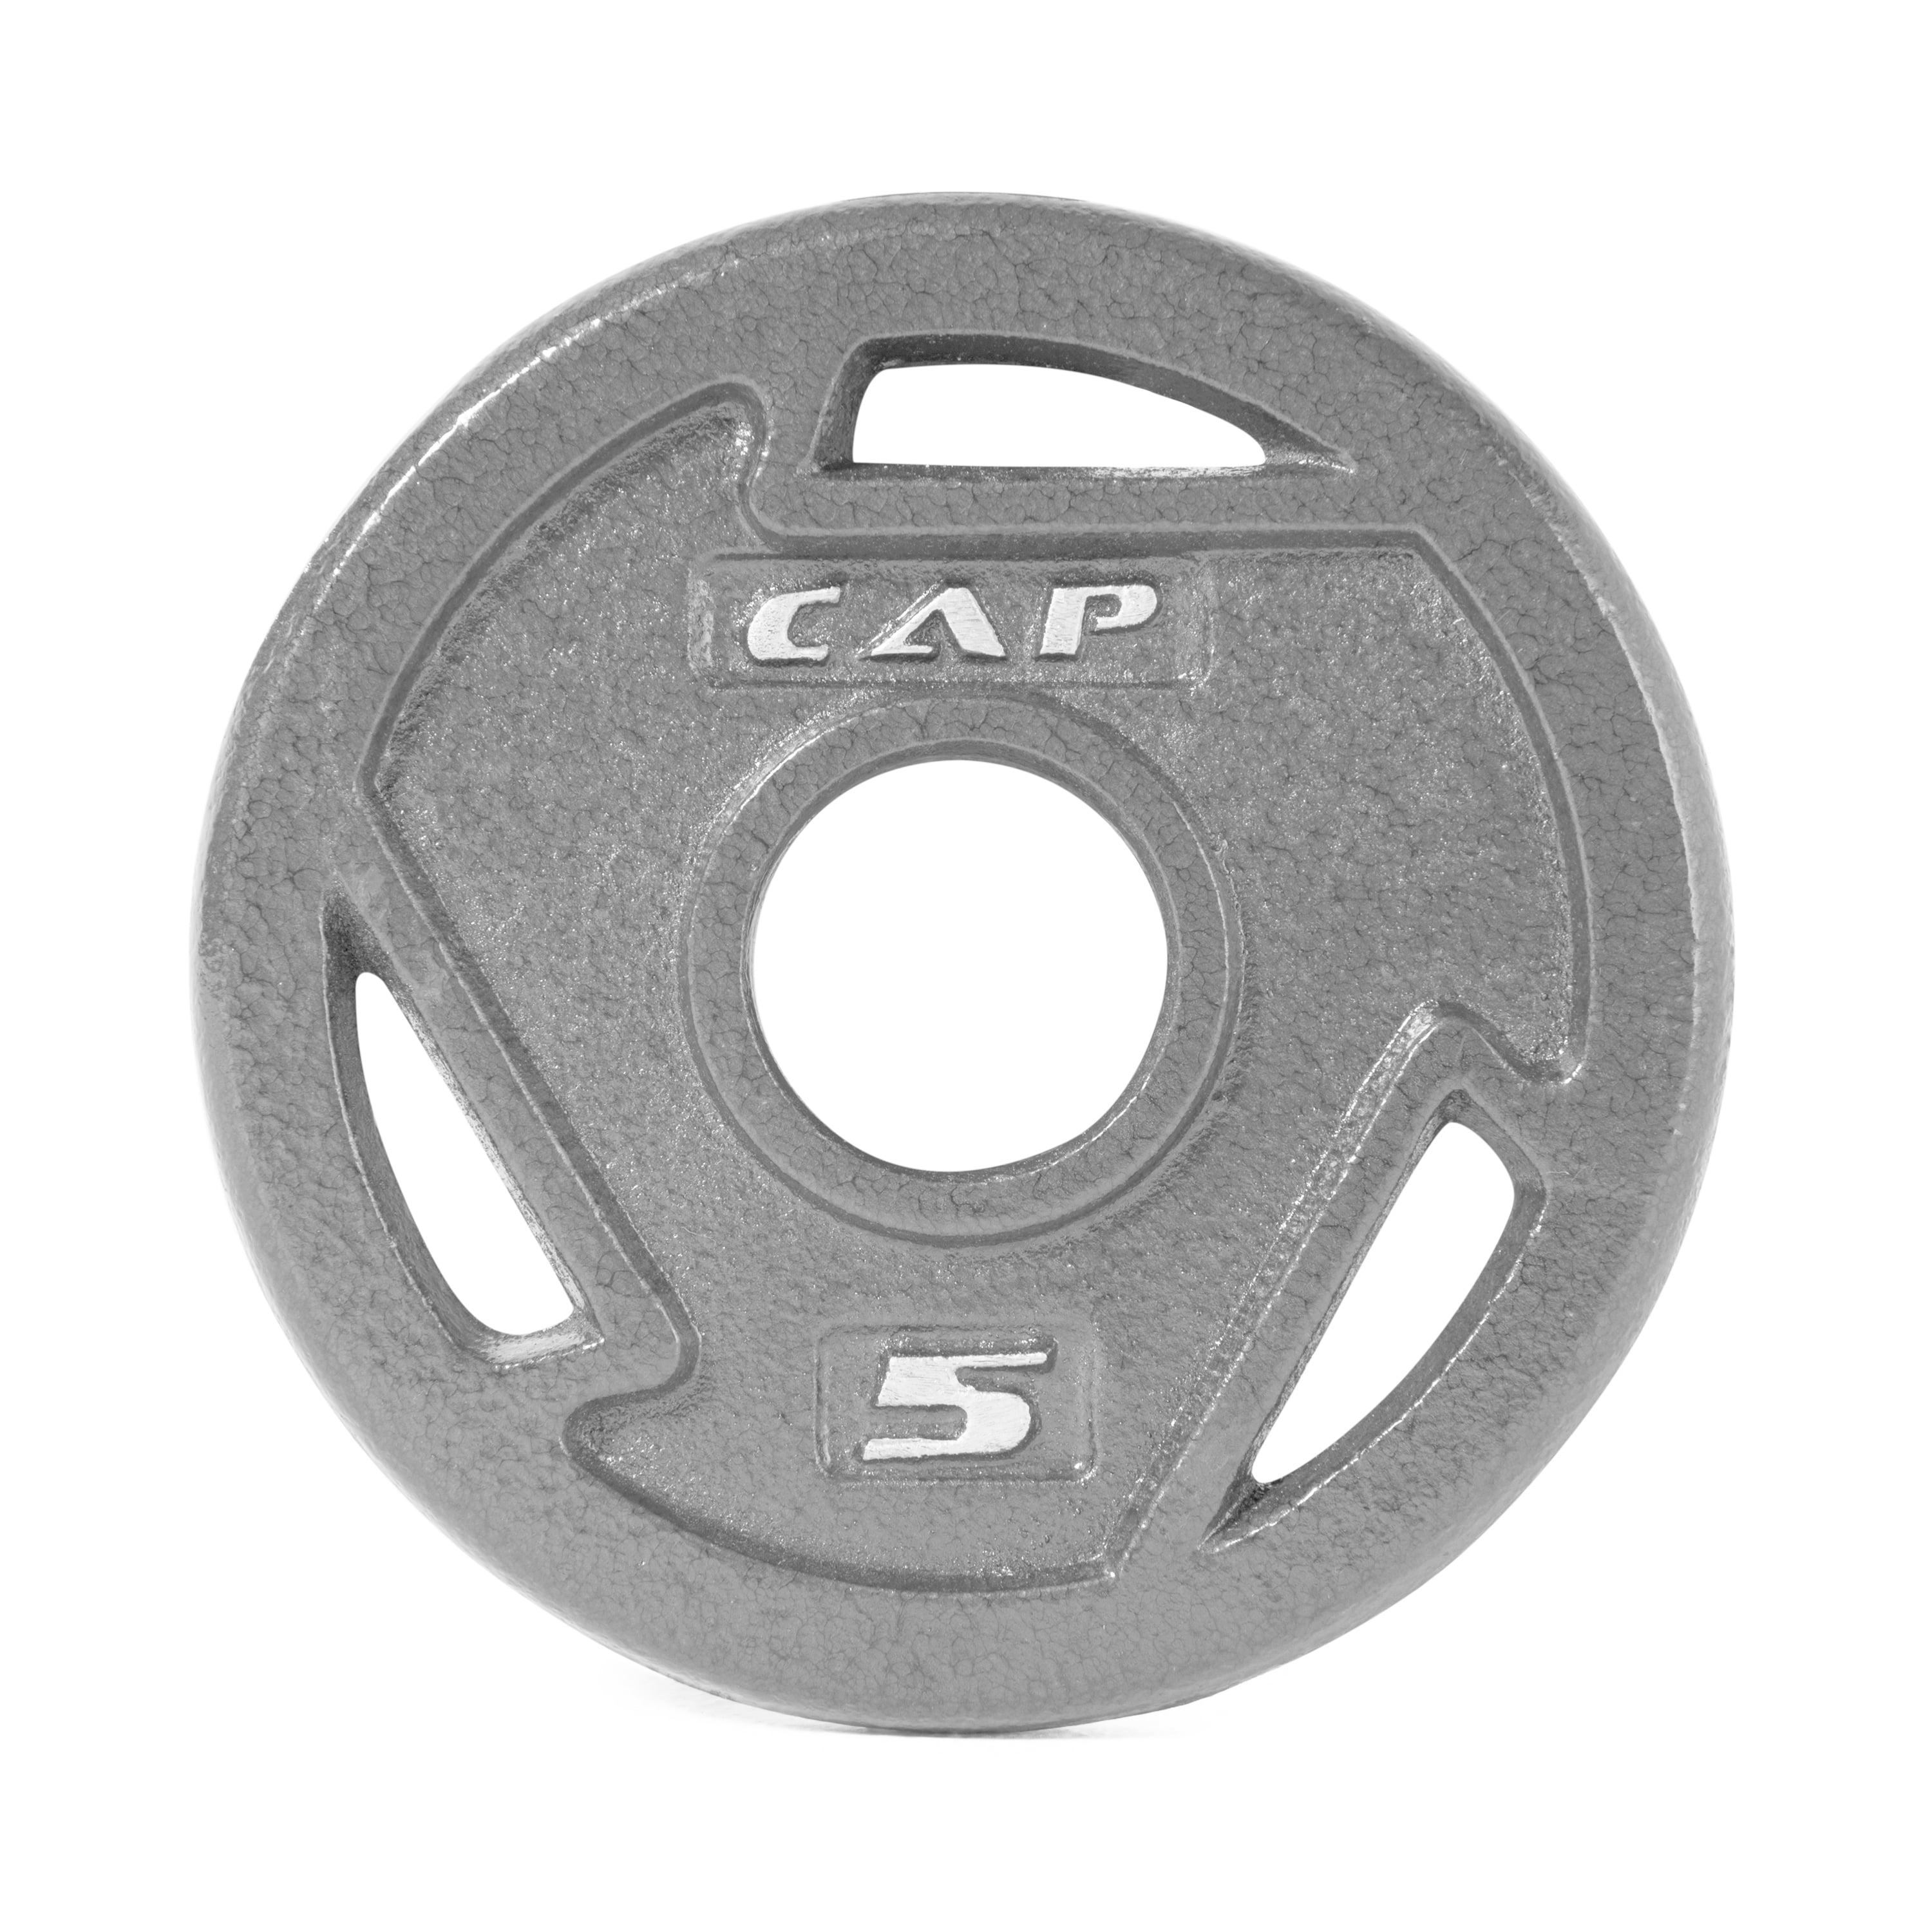 35 Pounds Details about   New Free Shipping CAP Barbell 2 Inch Olympic Grip Plate Single 